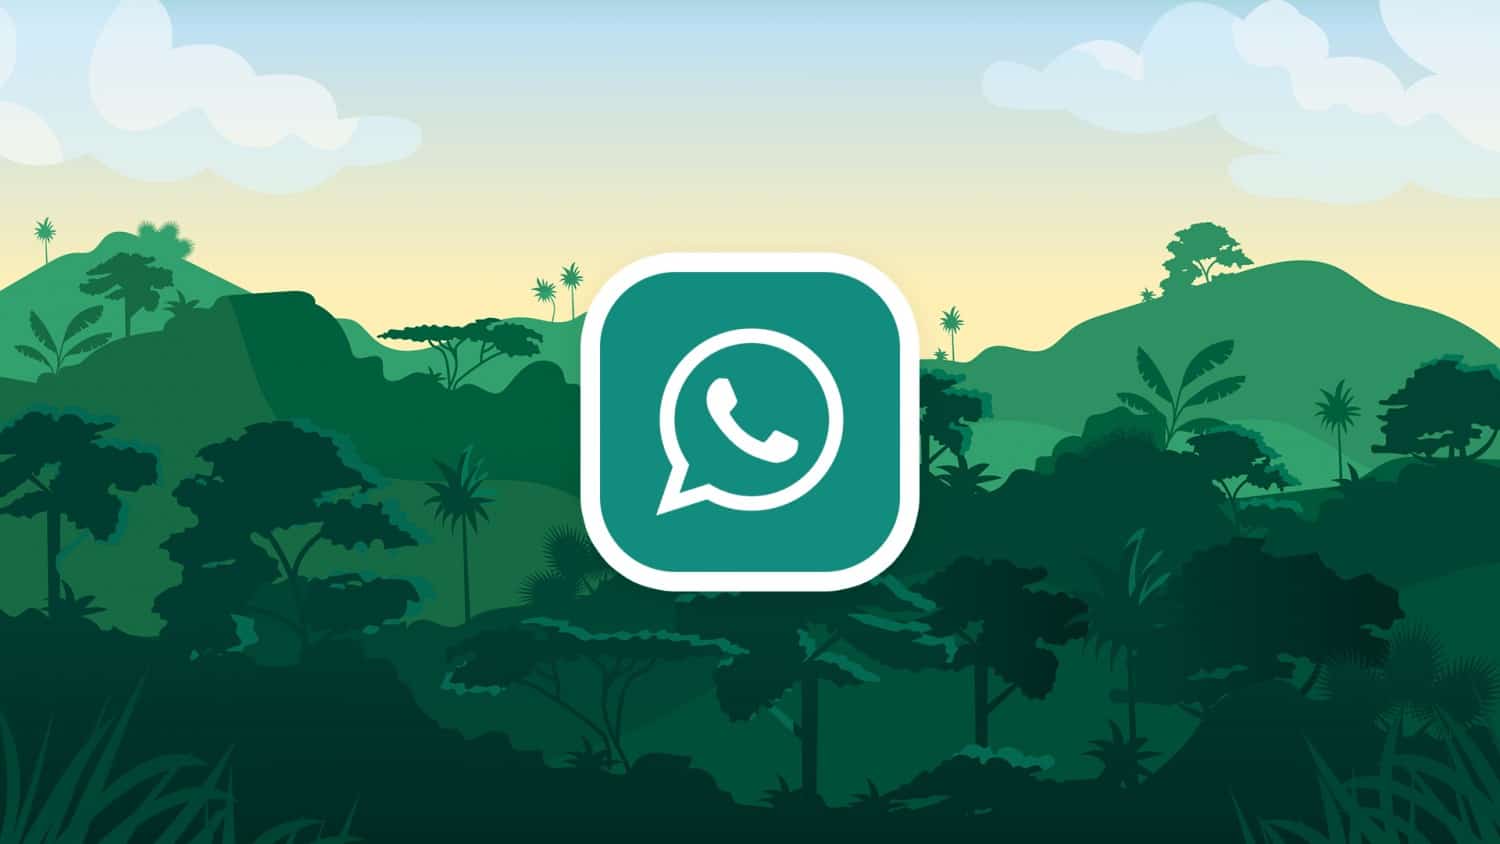 Whatsapp has become ubiquitous with mobile messaging, but it's not for...